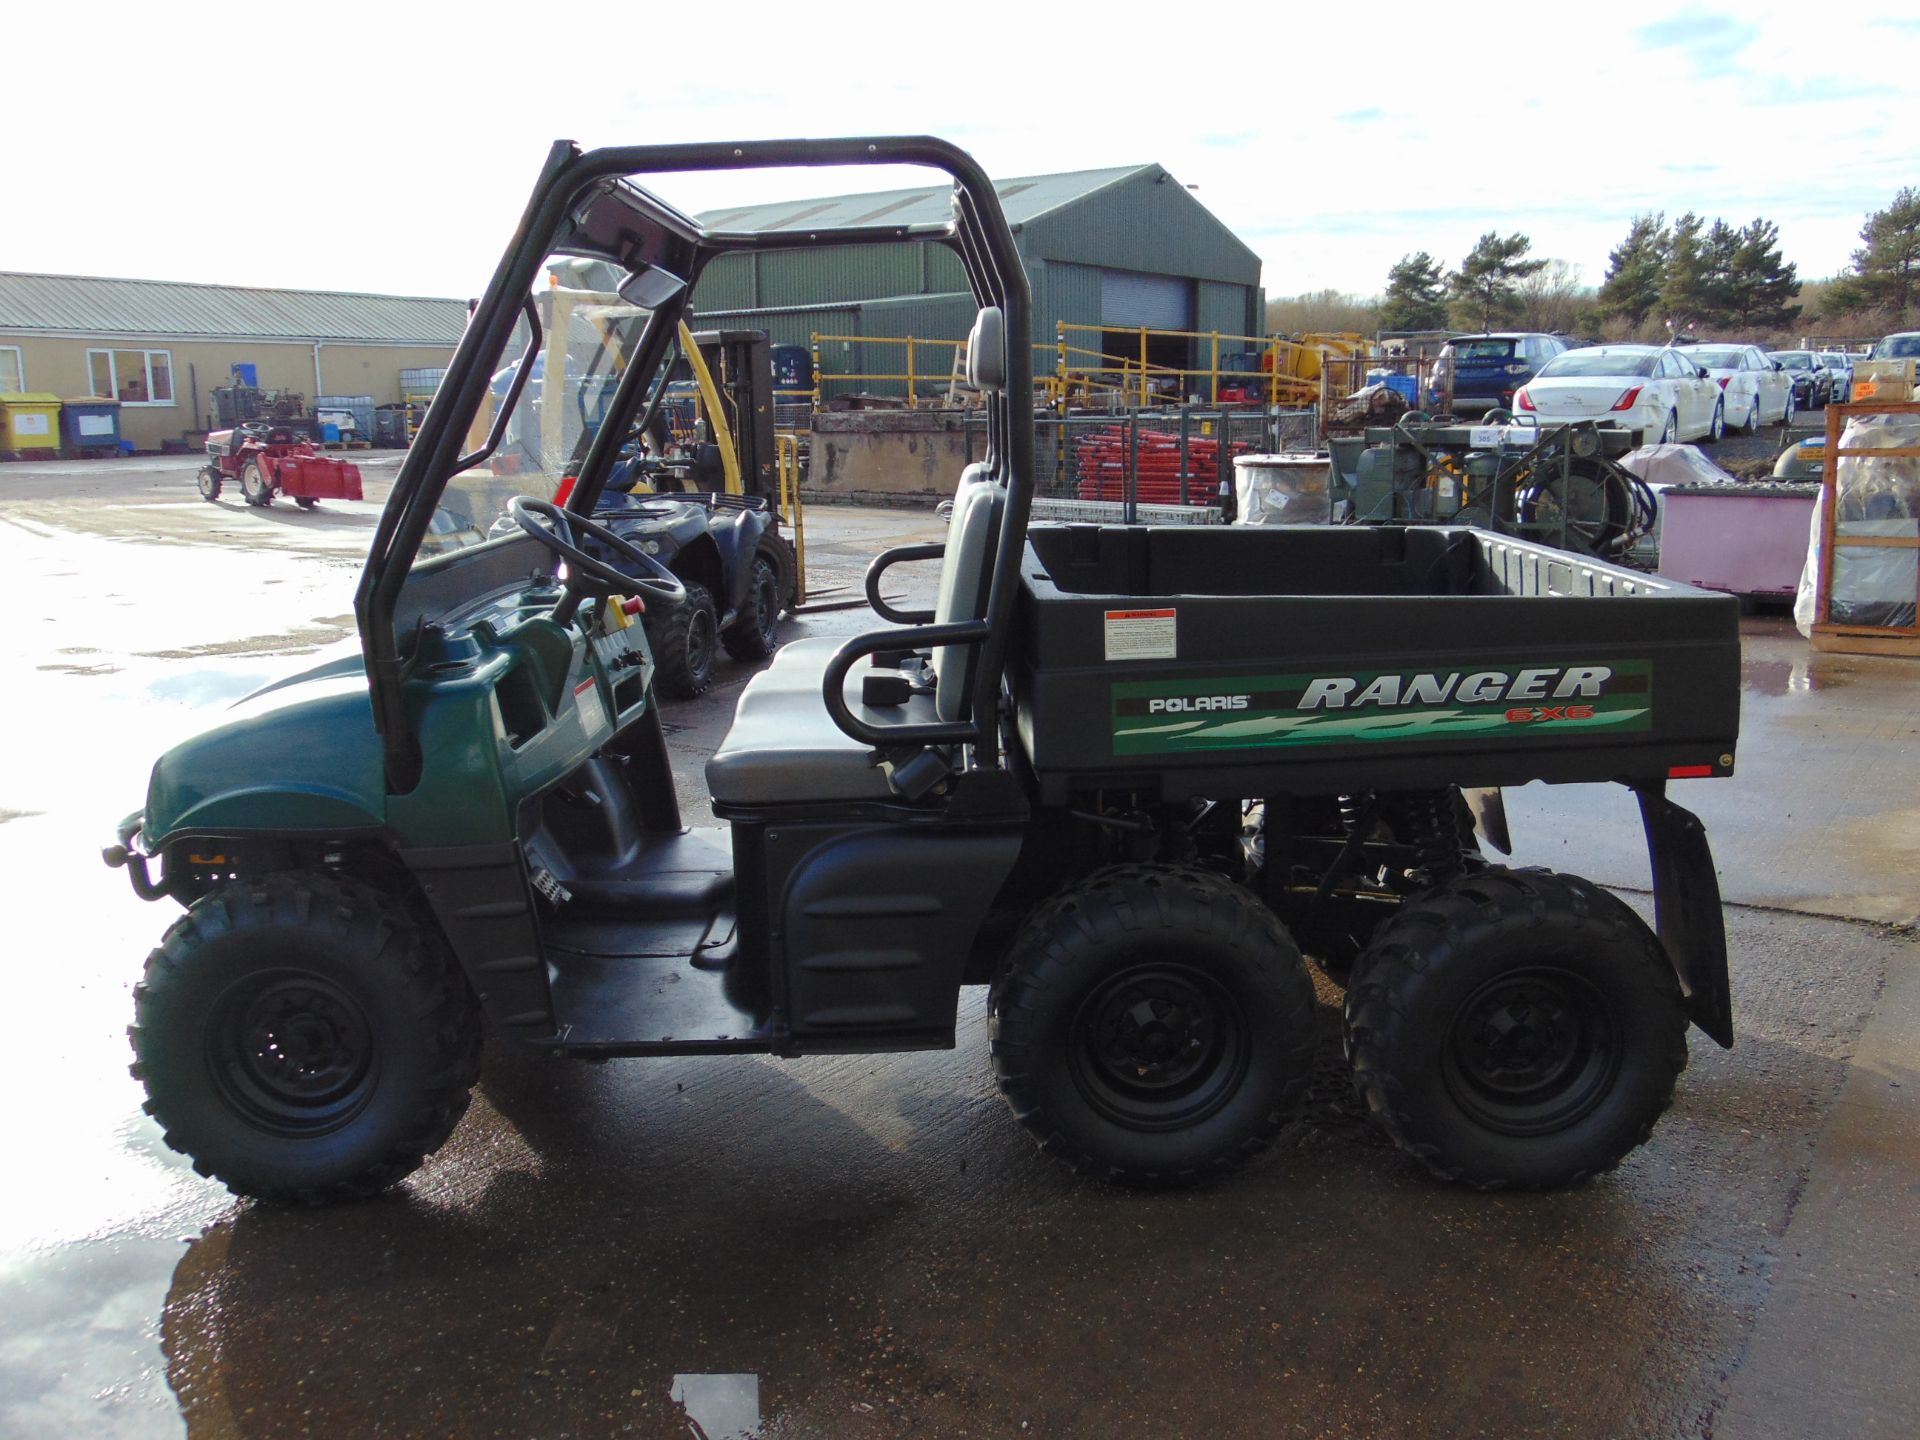 Polaris 6x6 800 EFI Ranger Utility Vehicle ONLY 280 HOURS from Govt Dept - Image 6 of 19